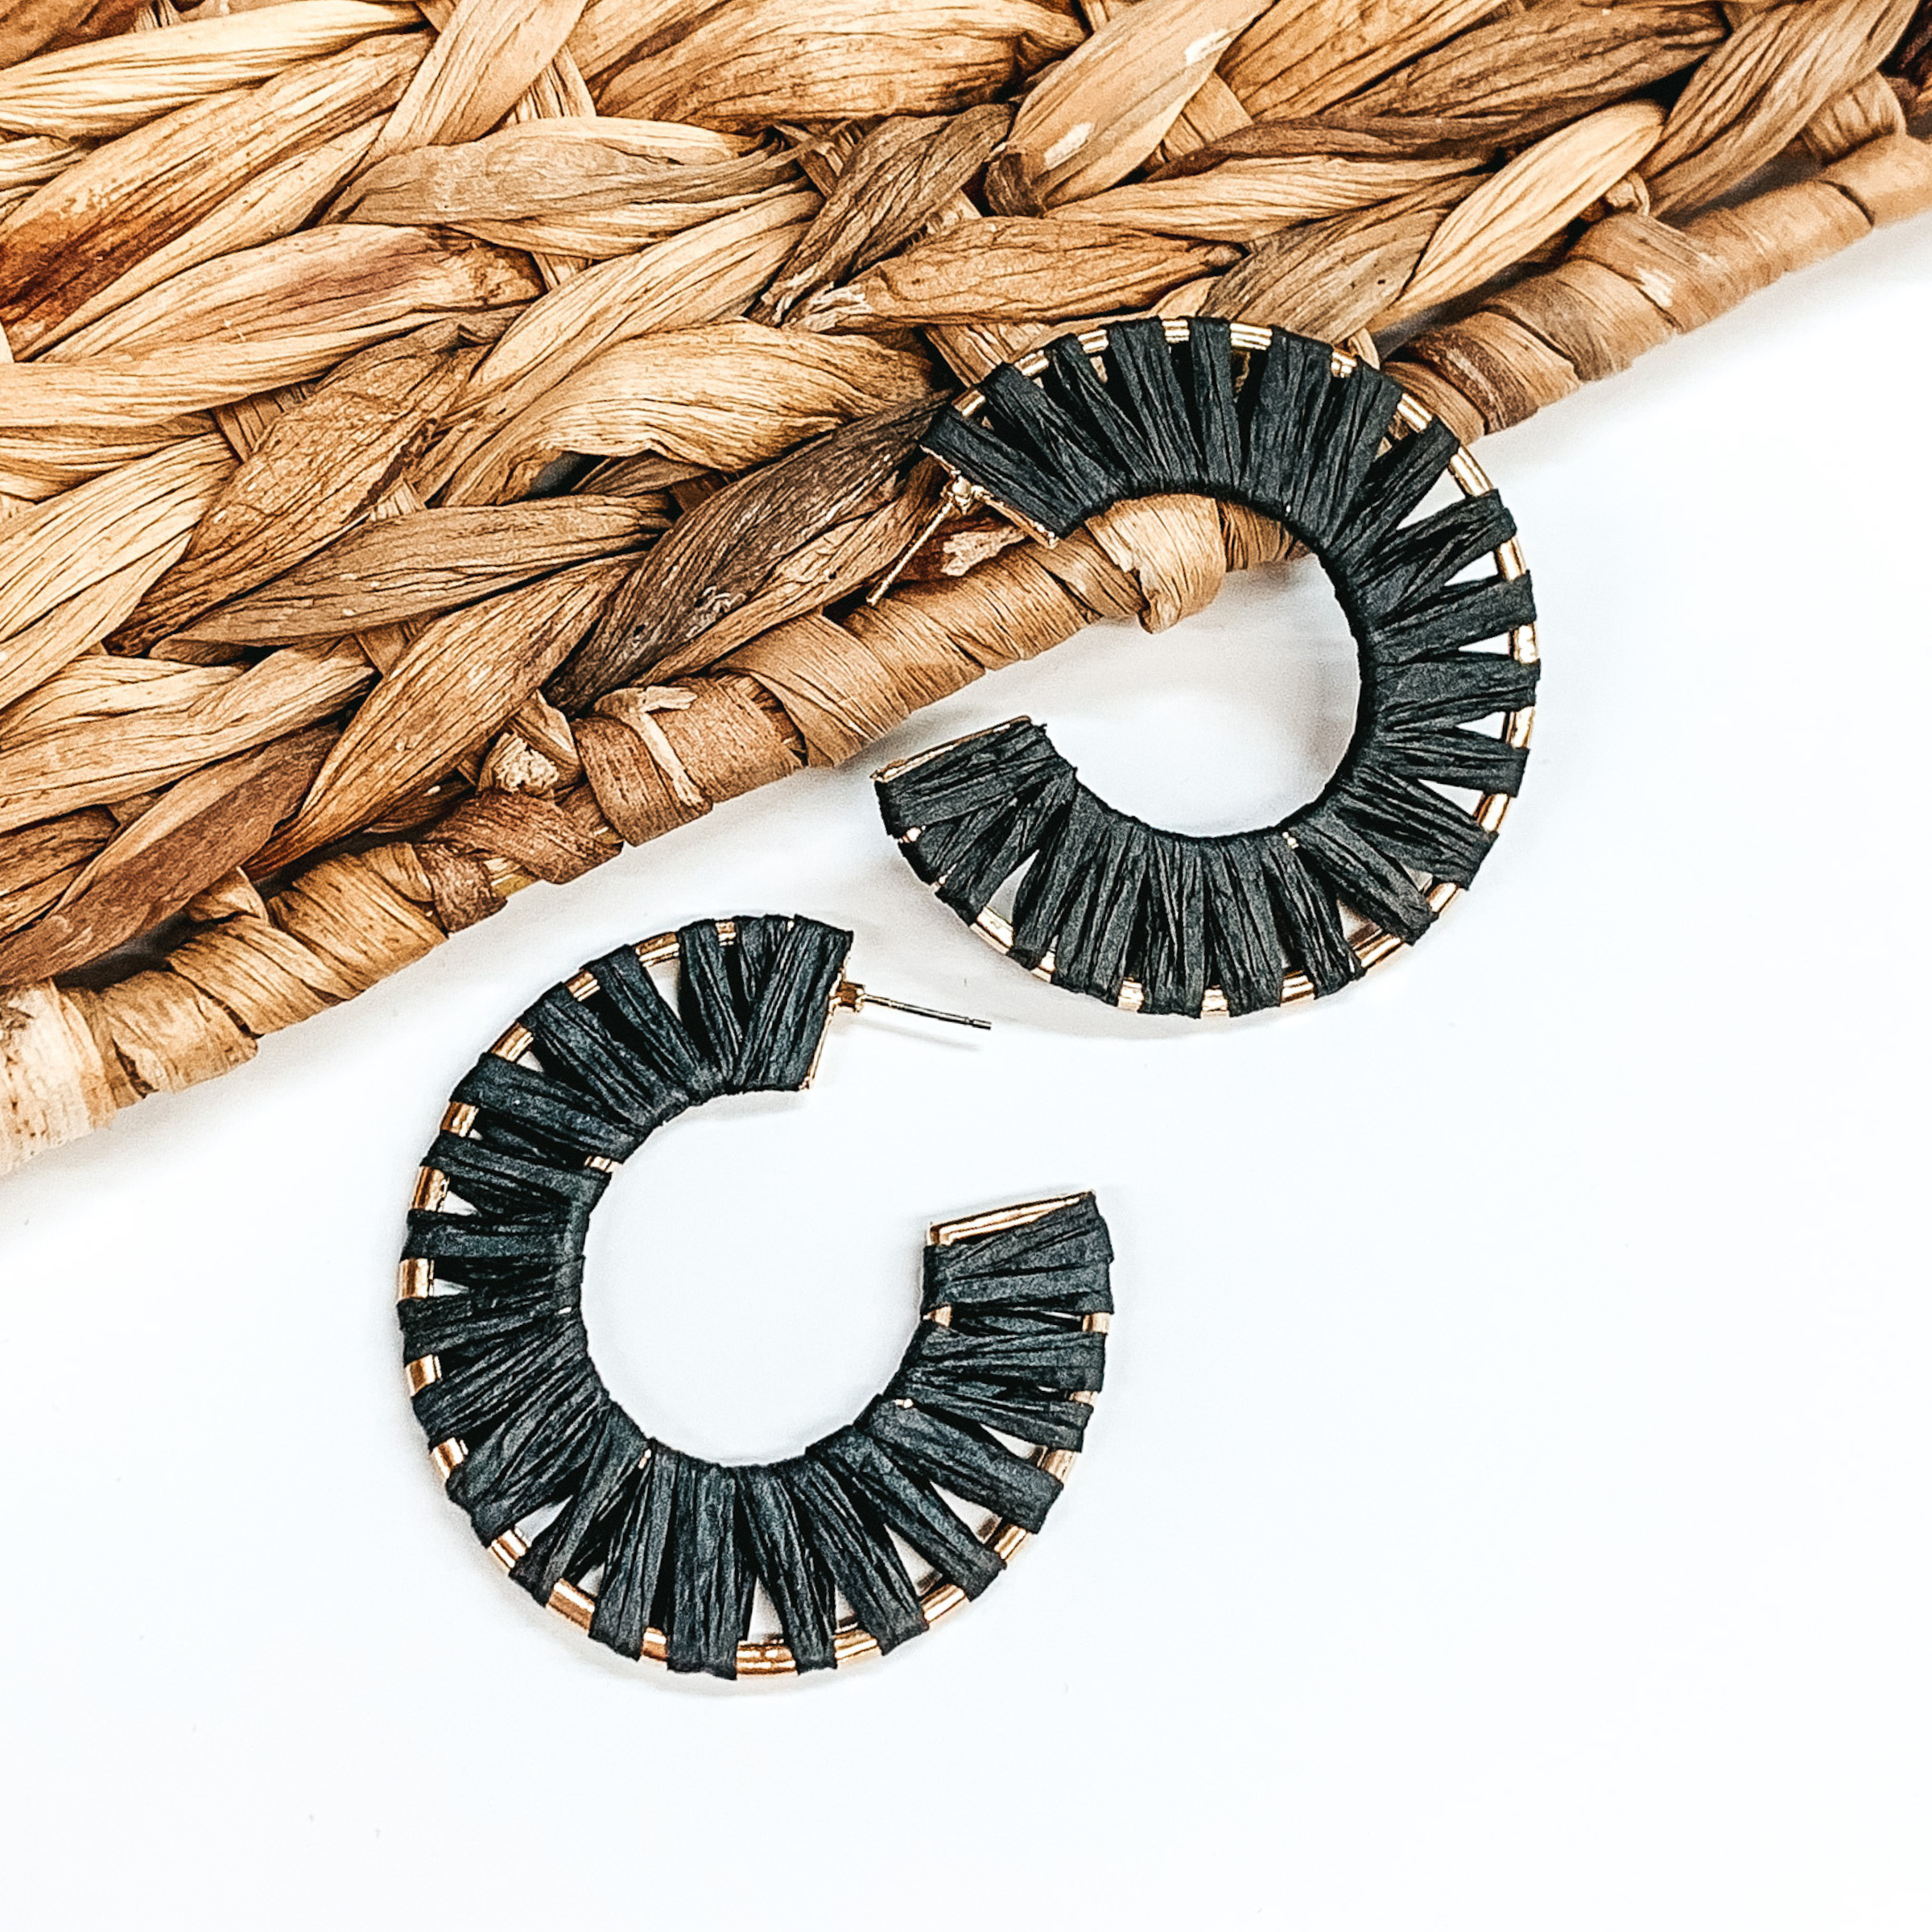 Gold wire circle hoop earrings that are wrapped in black raffia. These earrings are pictured on a white background with one of the hoops leaning on tan basket weave material.